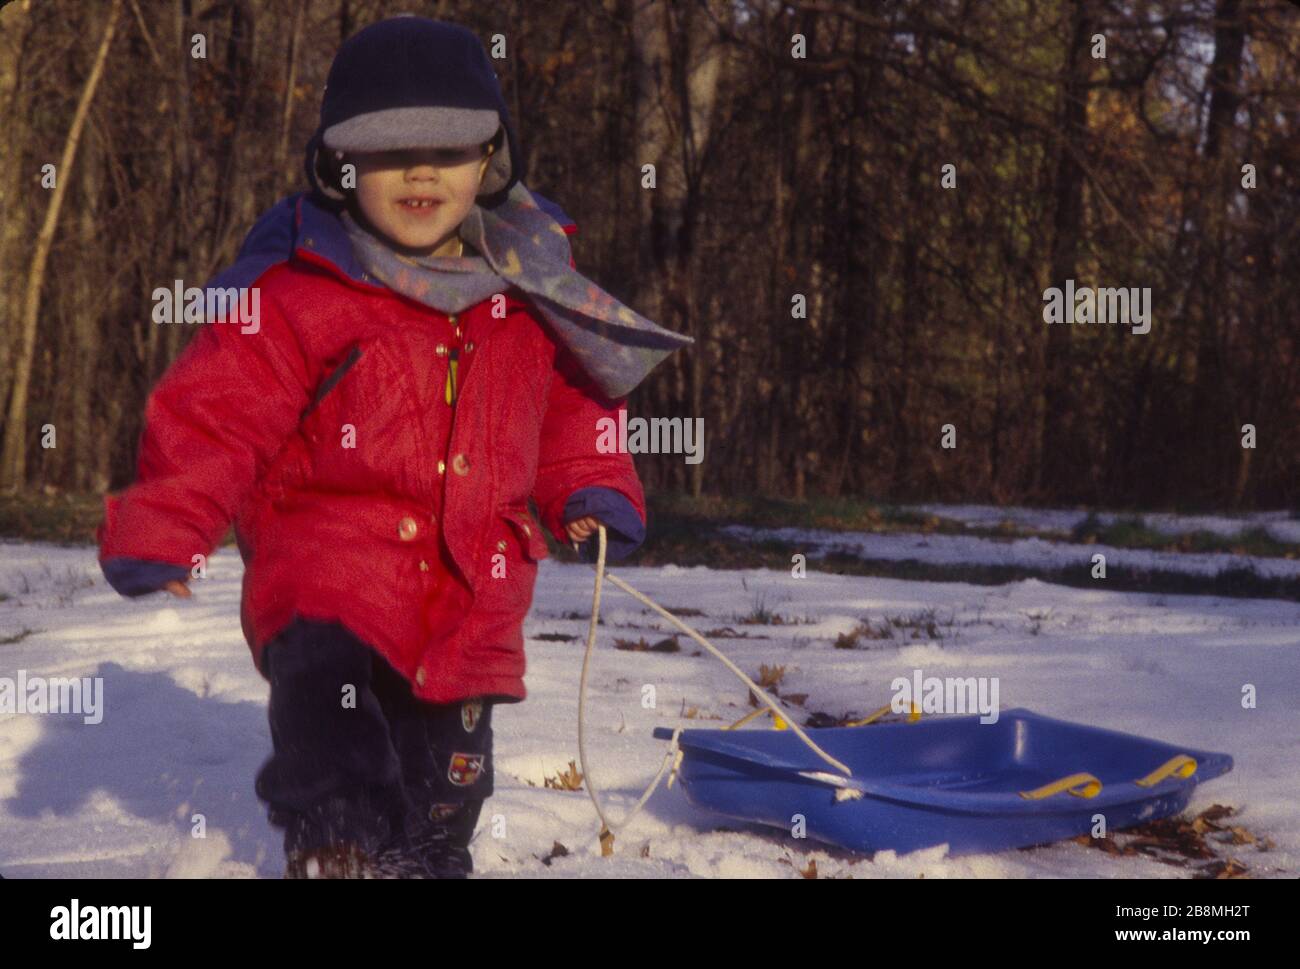 Toddler in red jacket pulling sled in snow Stock Photo